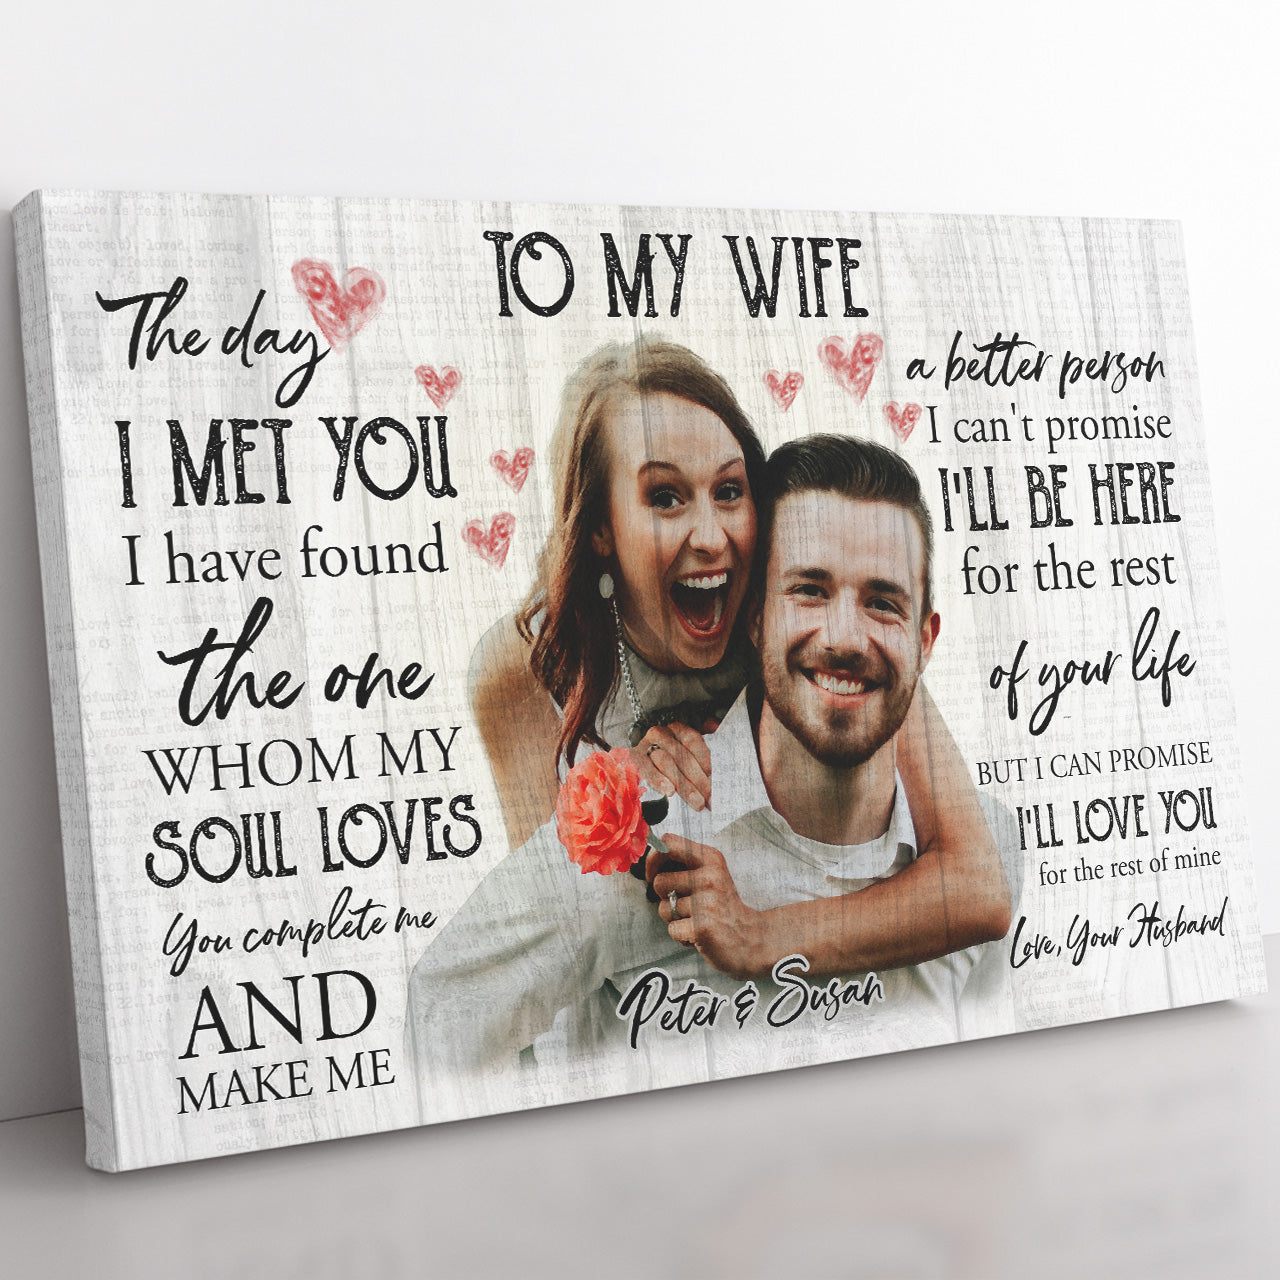 Personalized Canvas Gift Ideas to My Wife, Makes Me a Better 20121809